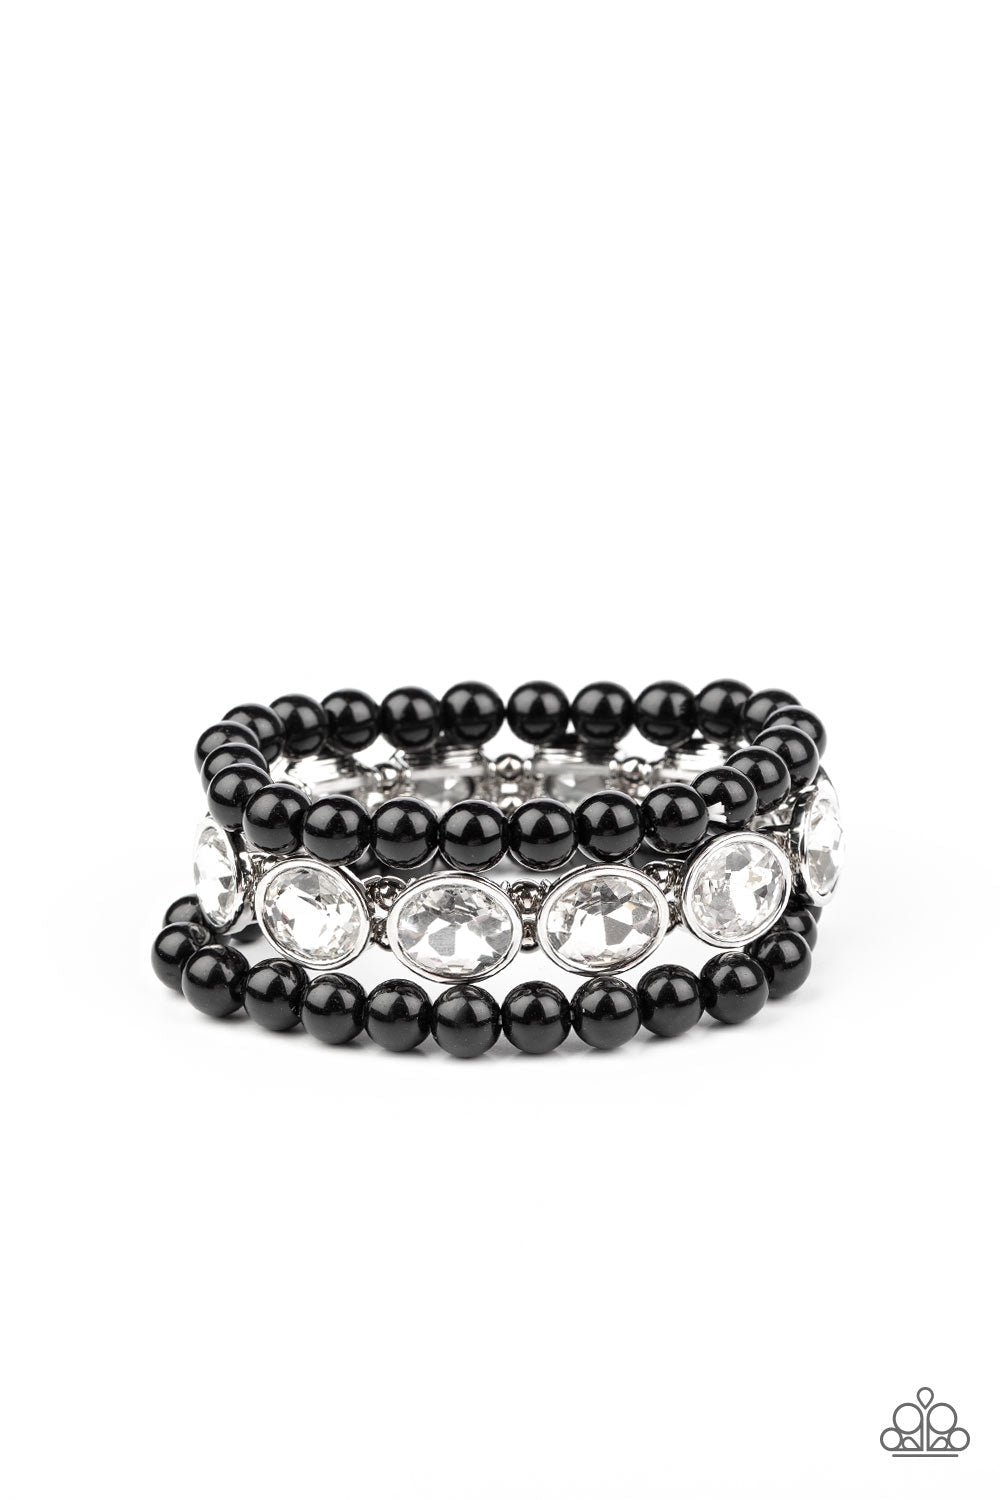 Flawlessly Flattering - Black and White Bracelet - Paparazzi Accessories - Infused with a pair of stretchy black beaded bracelets, a strand of oversized oval white gems are threaded along stretchy bands around the wrist for a flawlessly fabulous finish. Sold as one set of three bracelets.